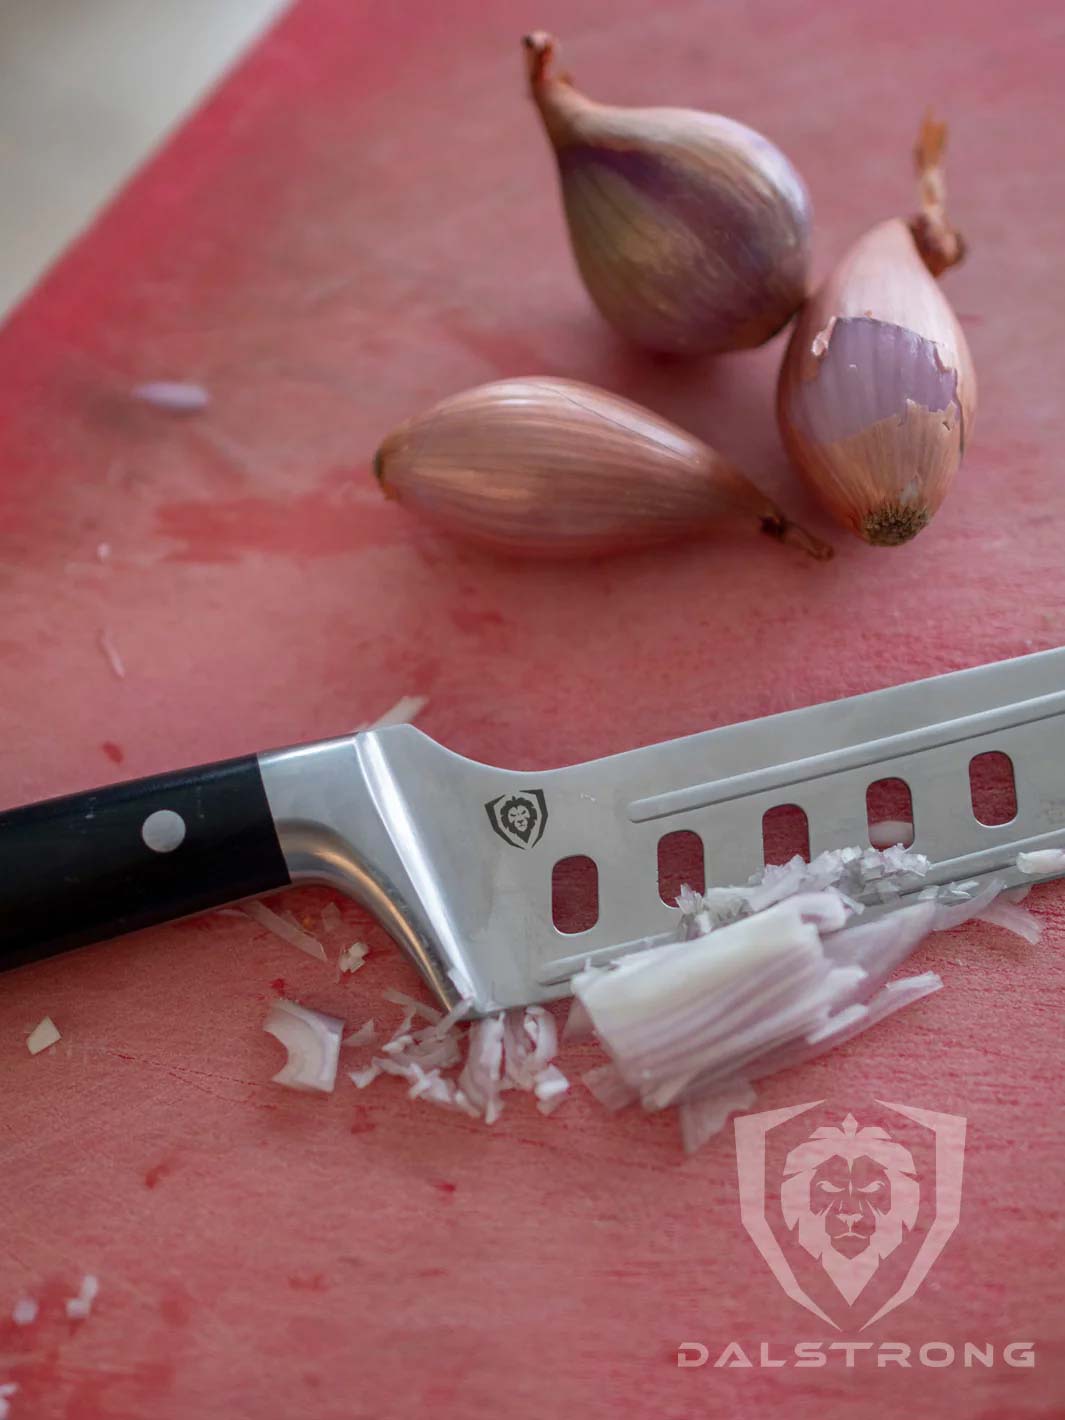 Dalstrong gladiator 6 inch offset nakiri knife with black handle and onions at the top of it.